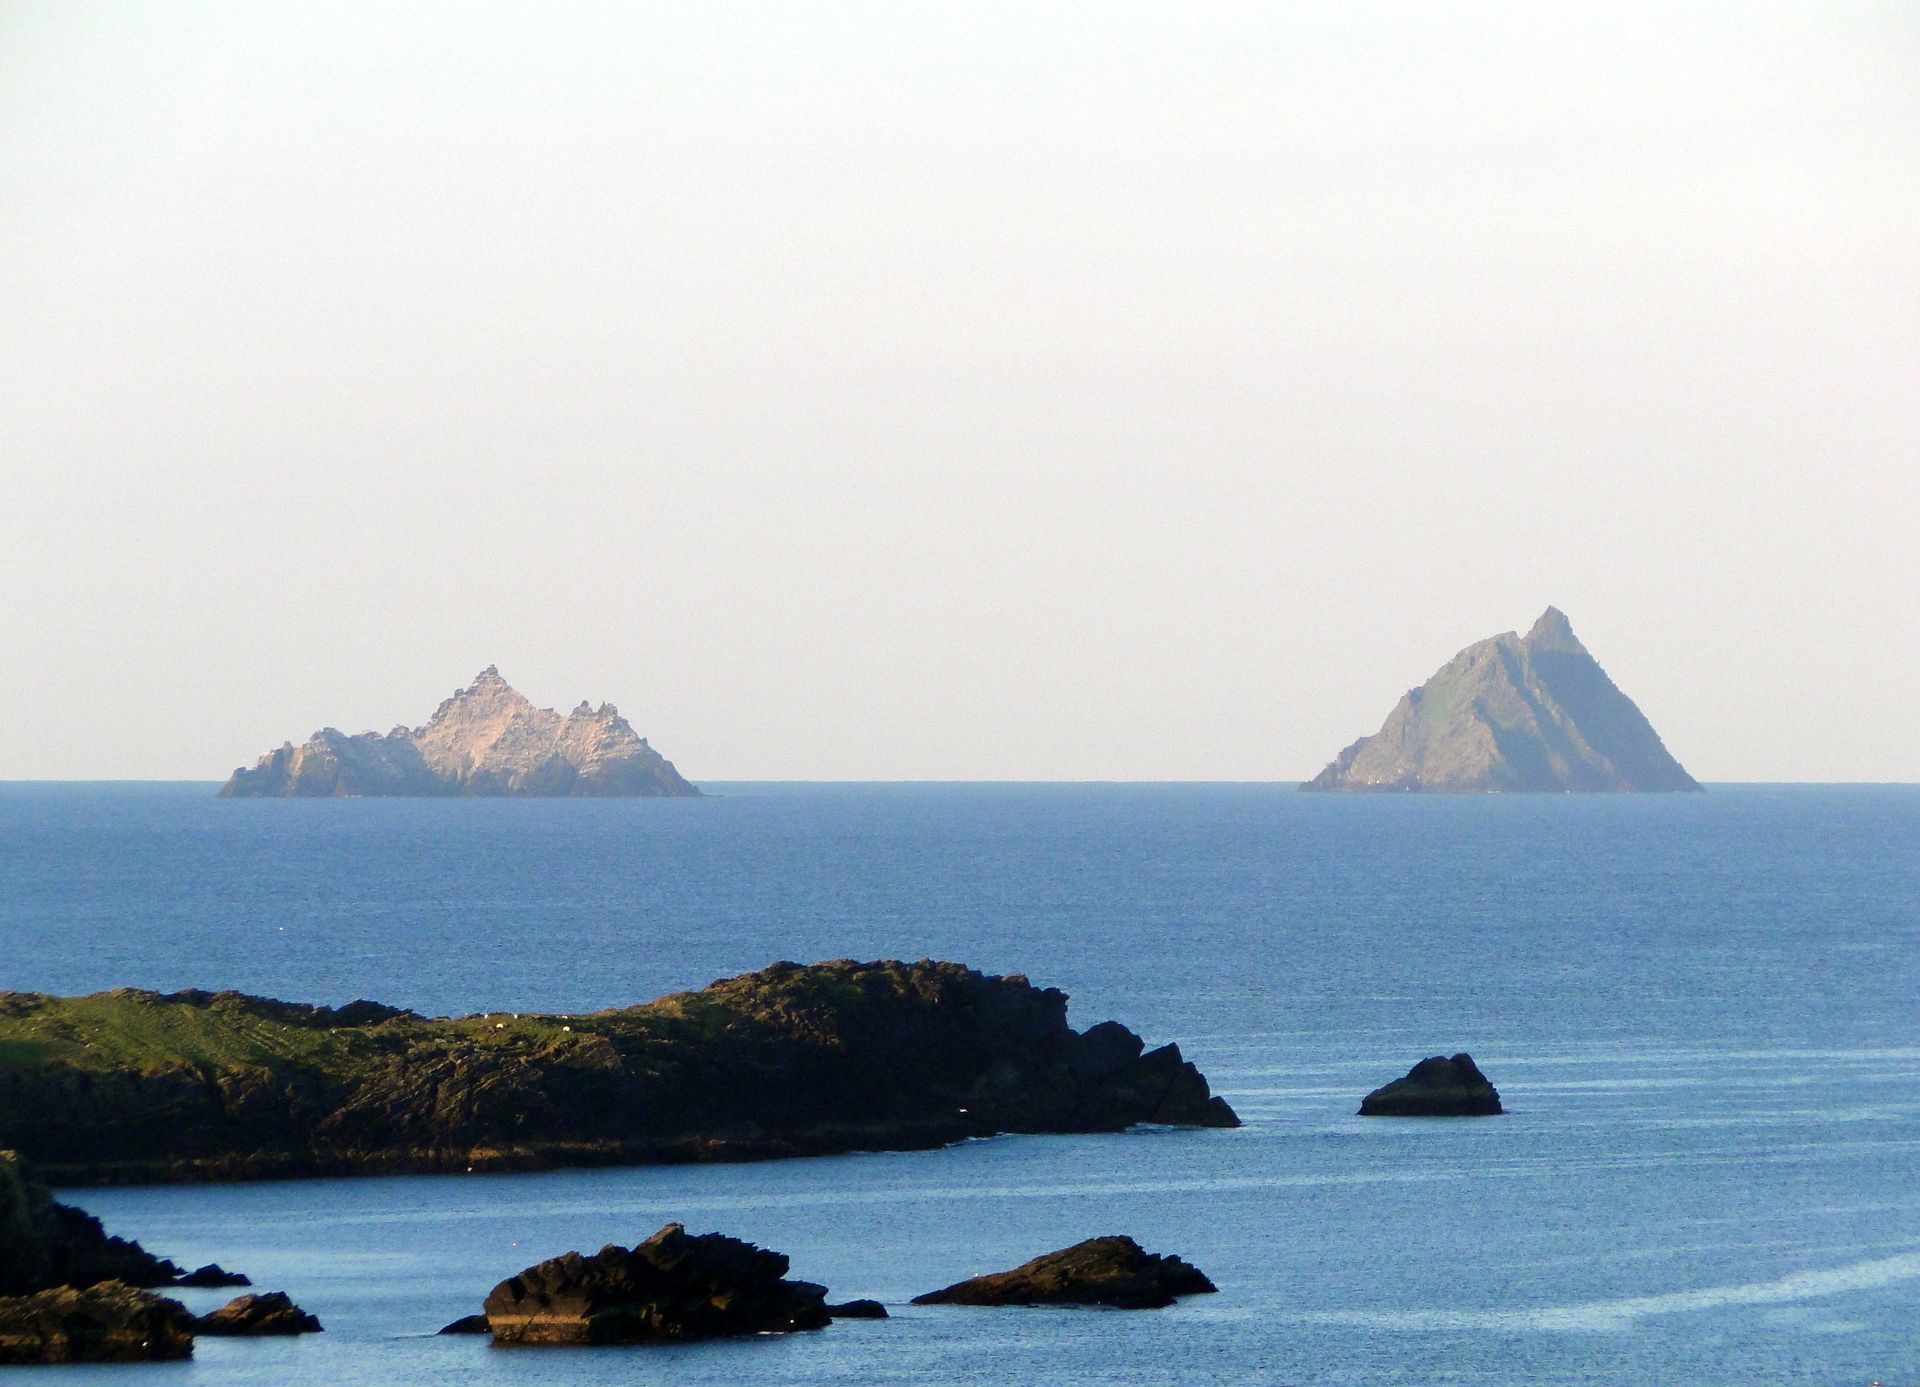 The Skellig Islands, off the coast of Co. Kerry, as seen from the mainland